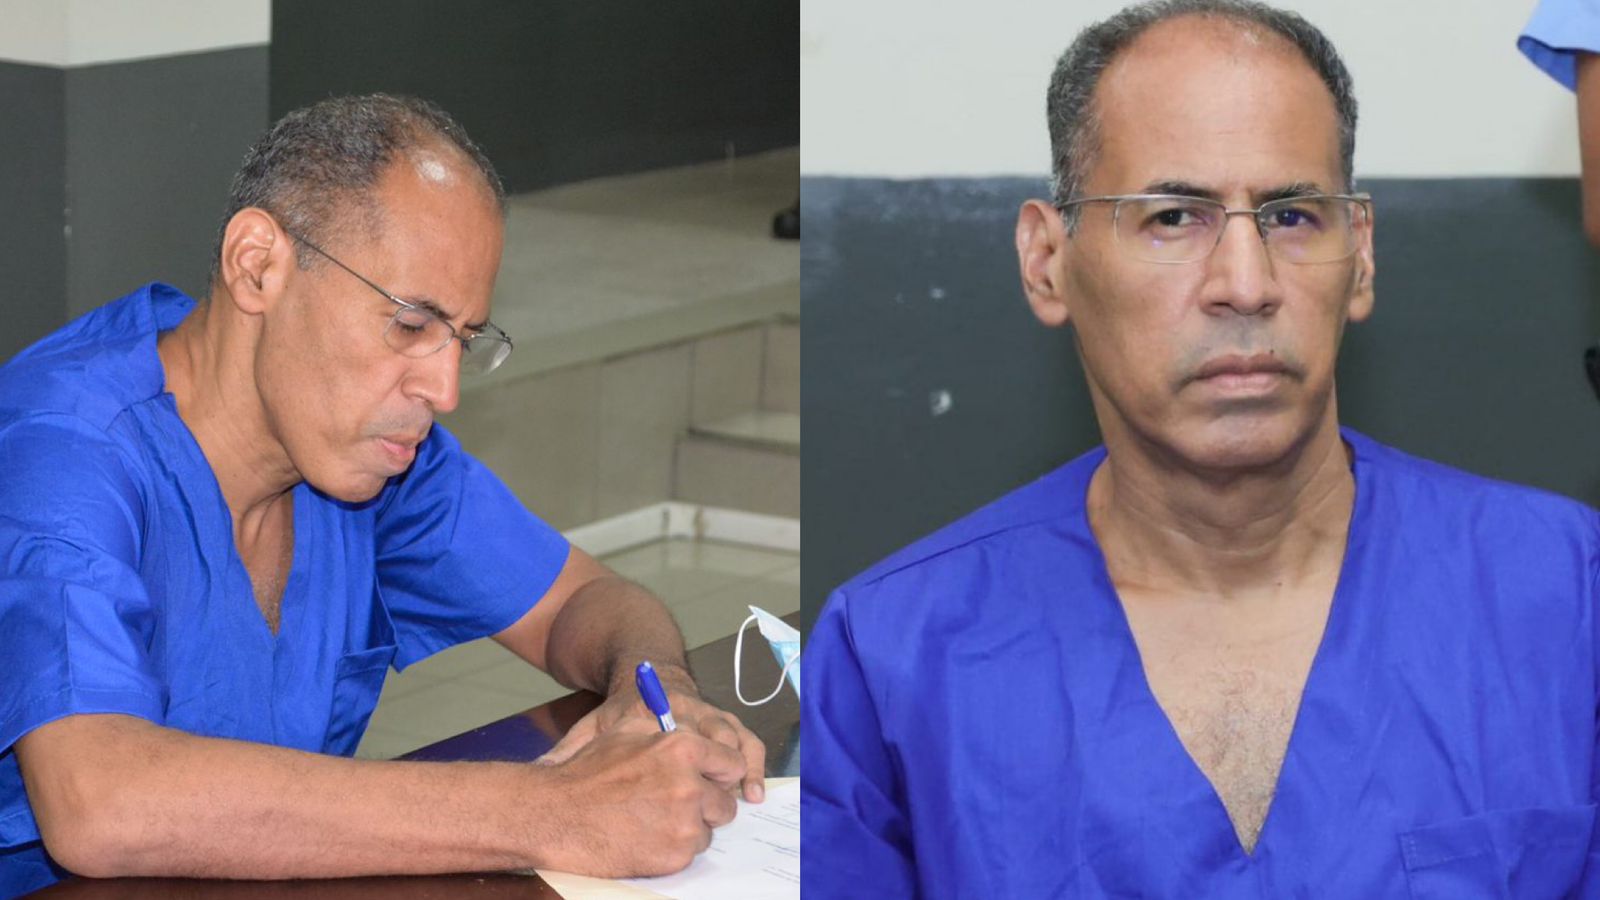 José Antonio Peraza is serving 15 months in prison, he is malnourished